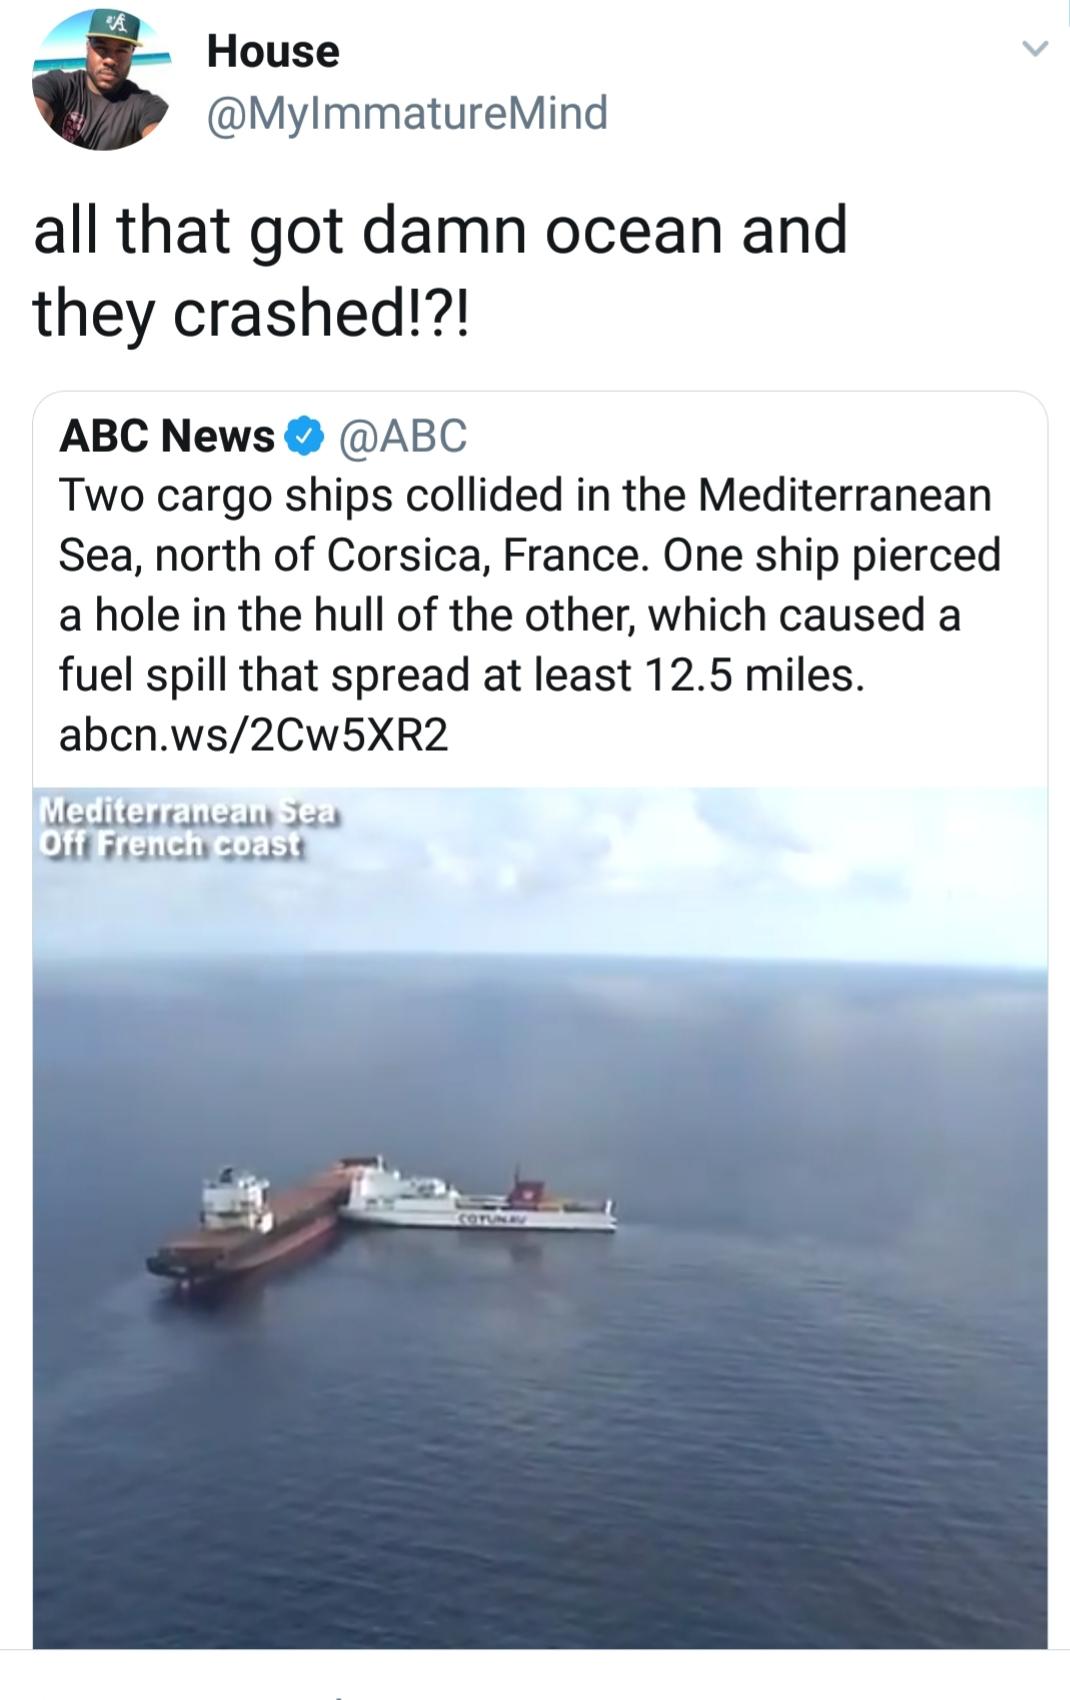 water resources - House all that got damn ocean and they crashed!?! Abc News Two cargo ships collided in the Mediterranean Sea, north of Corsica, France. One ship pierced a hole in the hull of the other, which caused a fuel spill that spread at least 12.5